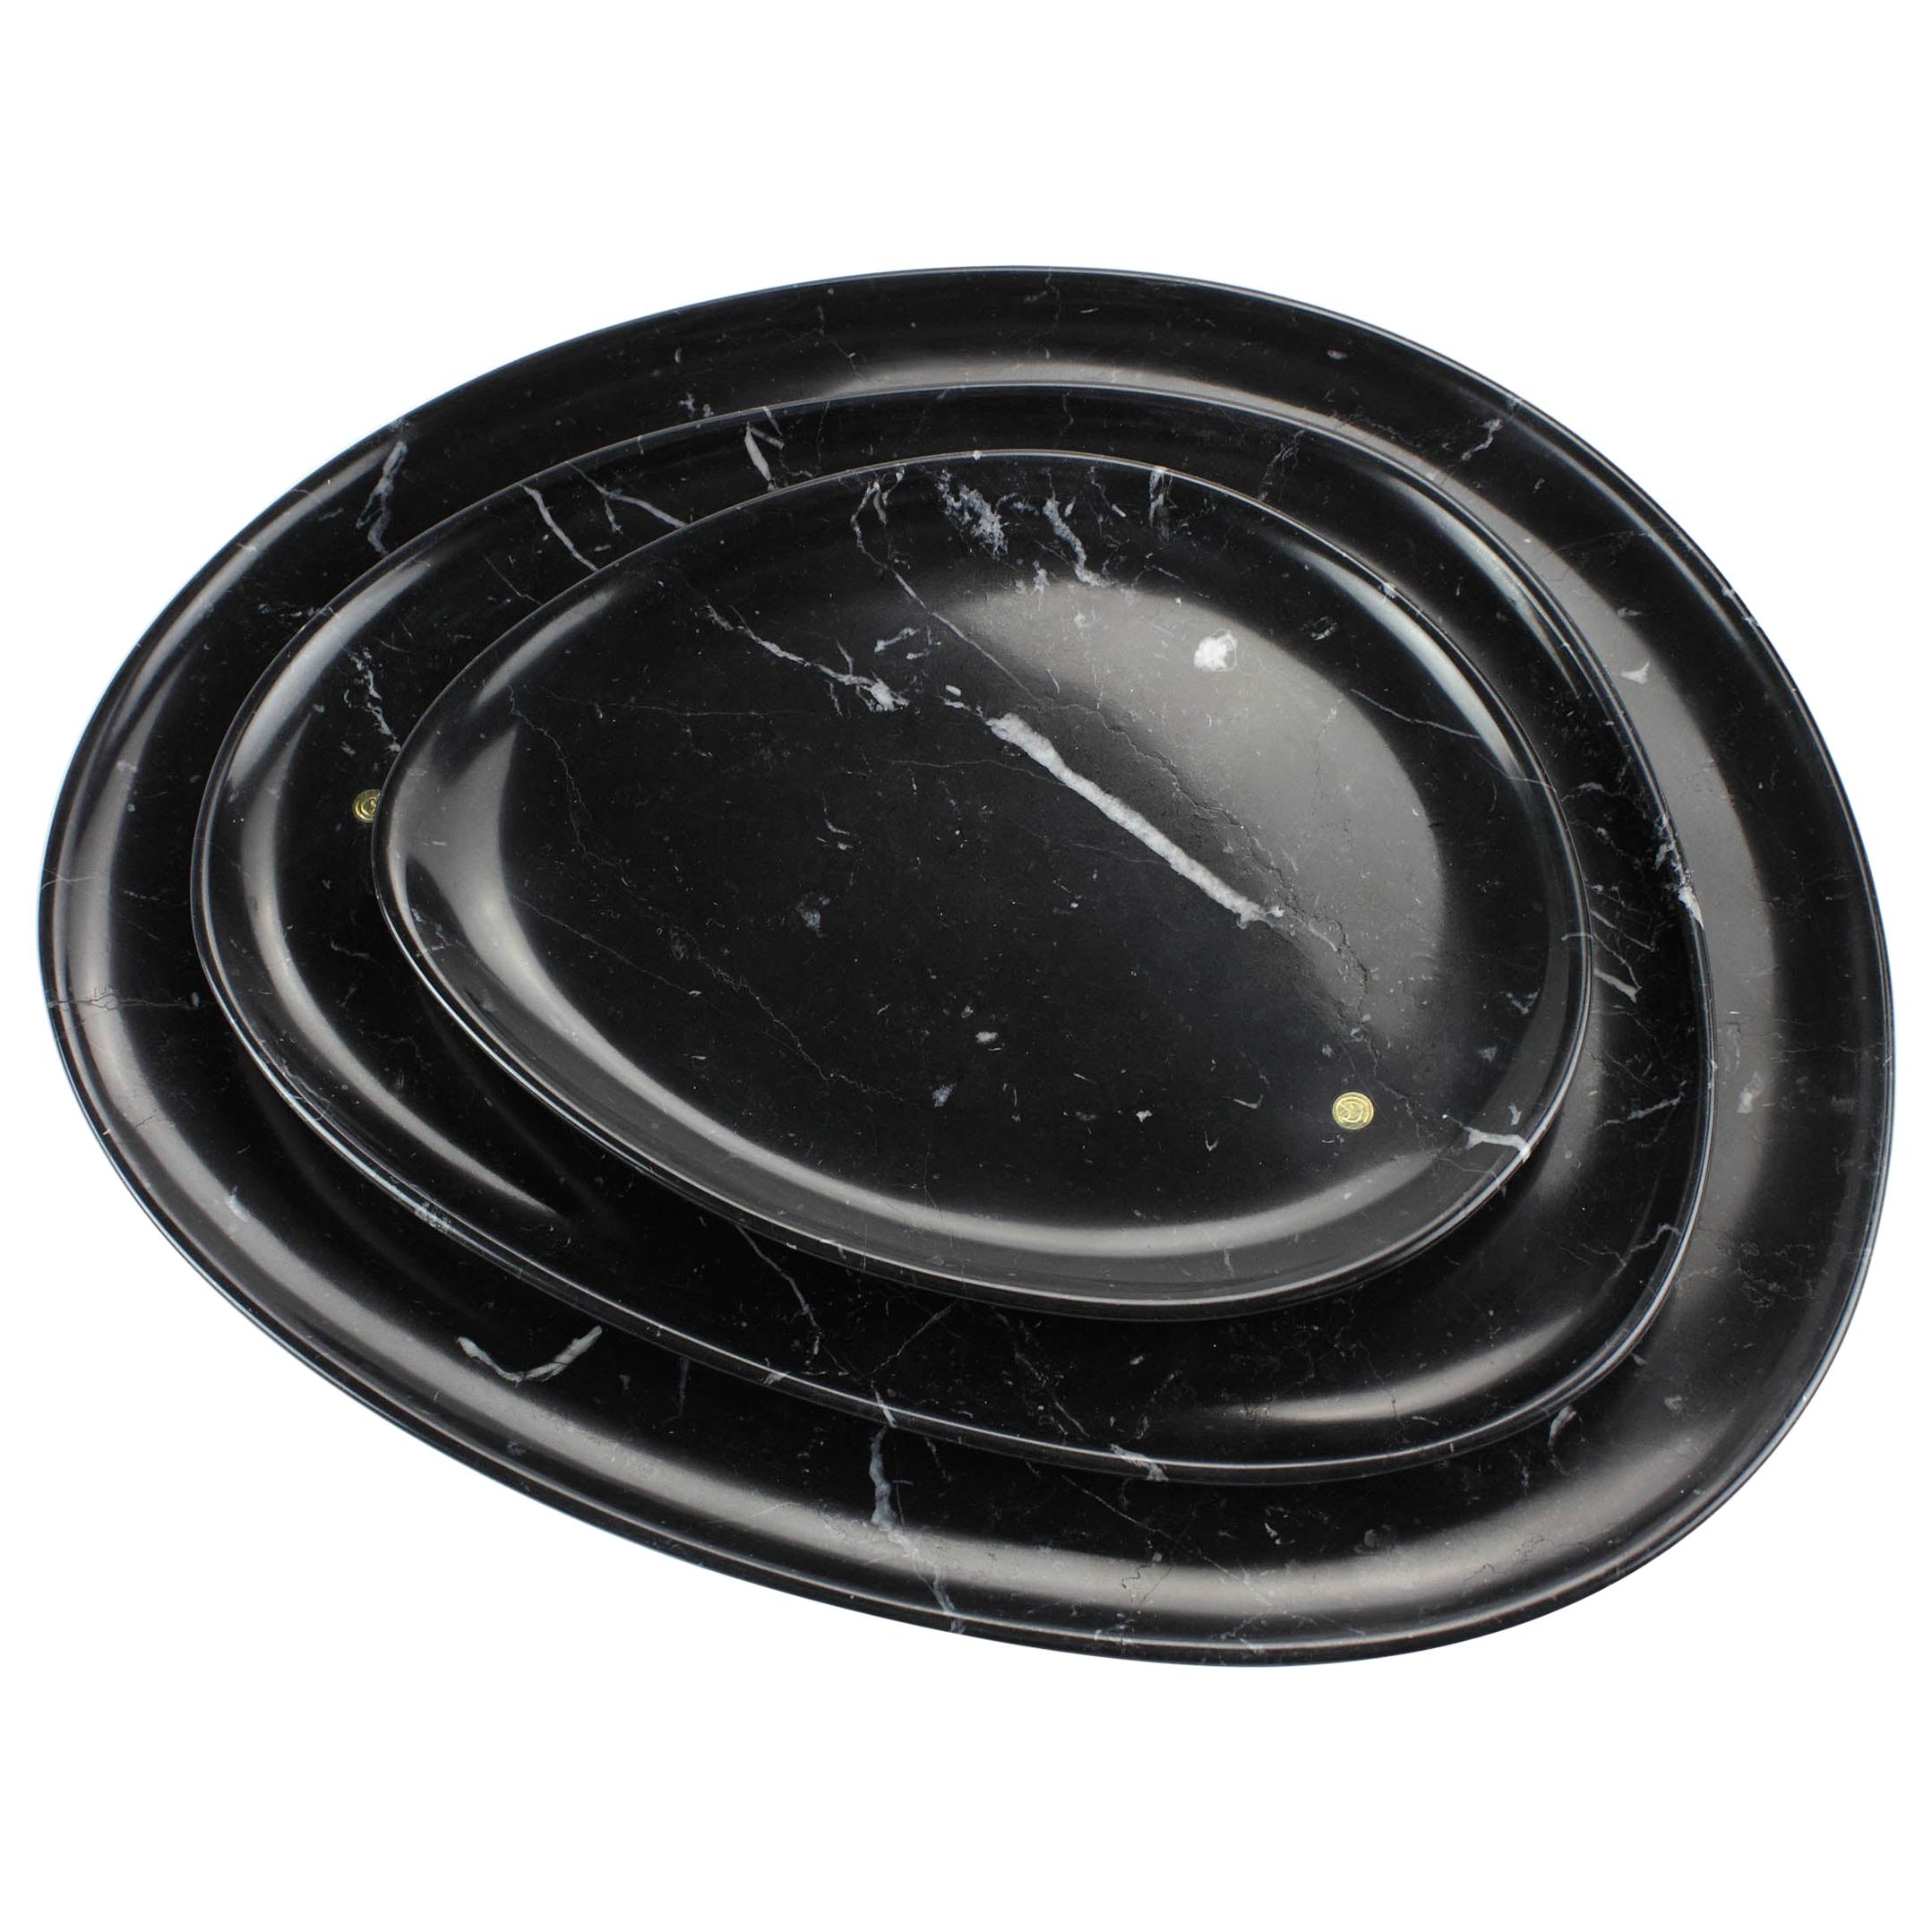 Assiettes Plateaux Service Set Black Marquina Marble Collectible Handmade Italy en vente